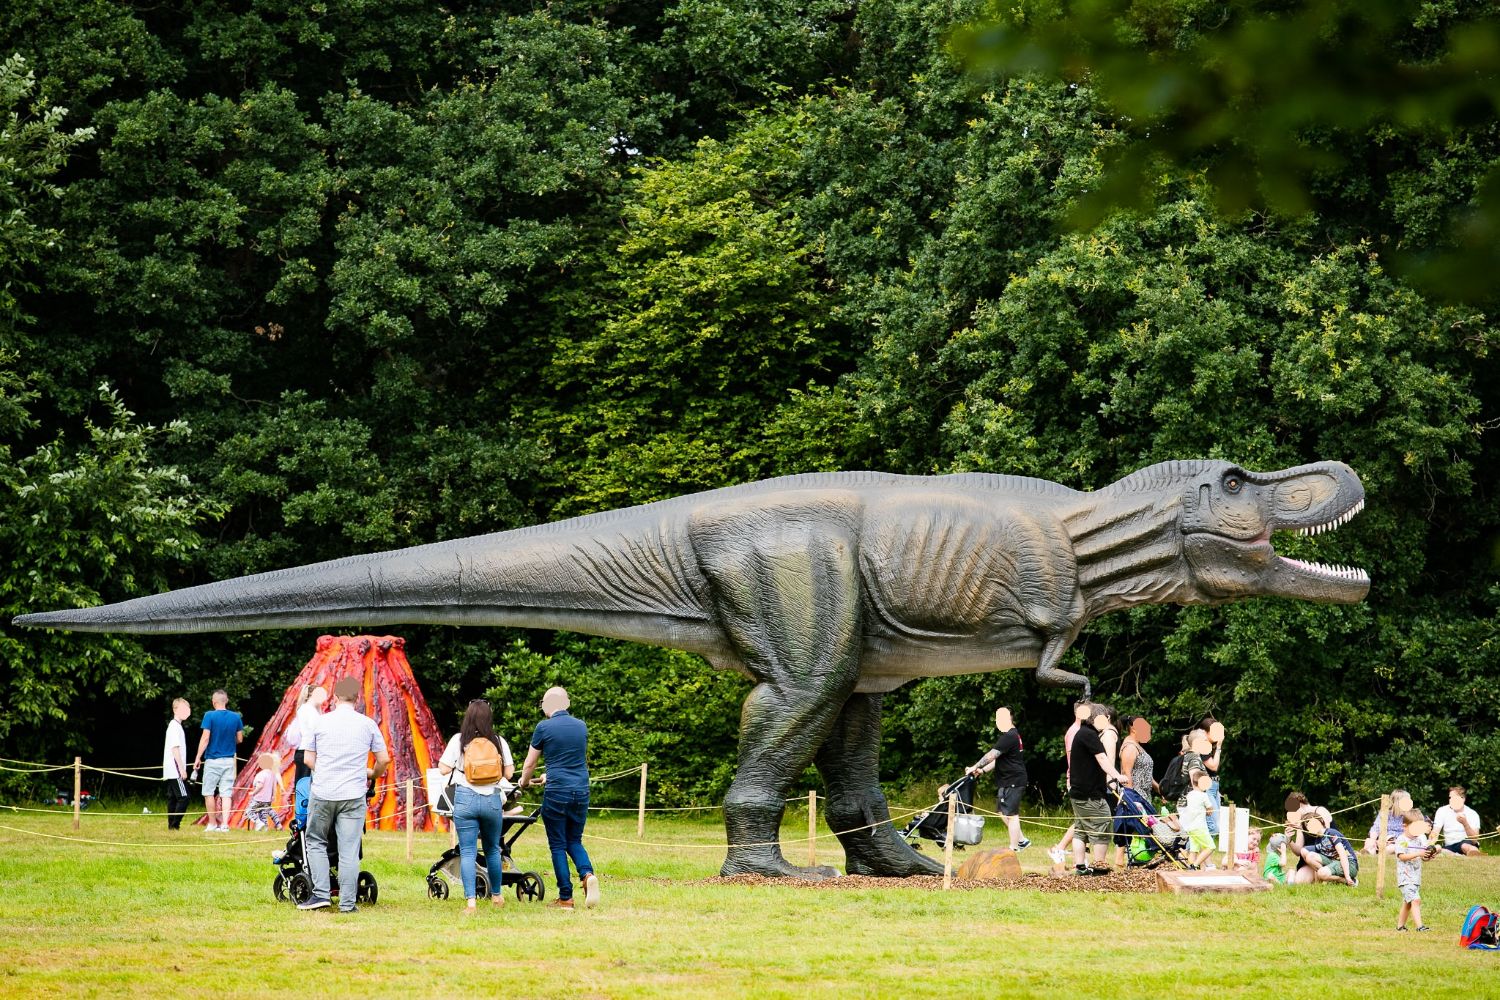 Animatronic Dinosaurs, Dragons & Insects; Interactive Rides, Costumes, Props & Decorations inc. Fossils, Bones, Eggs & Stones and Toy Stock